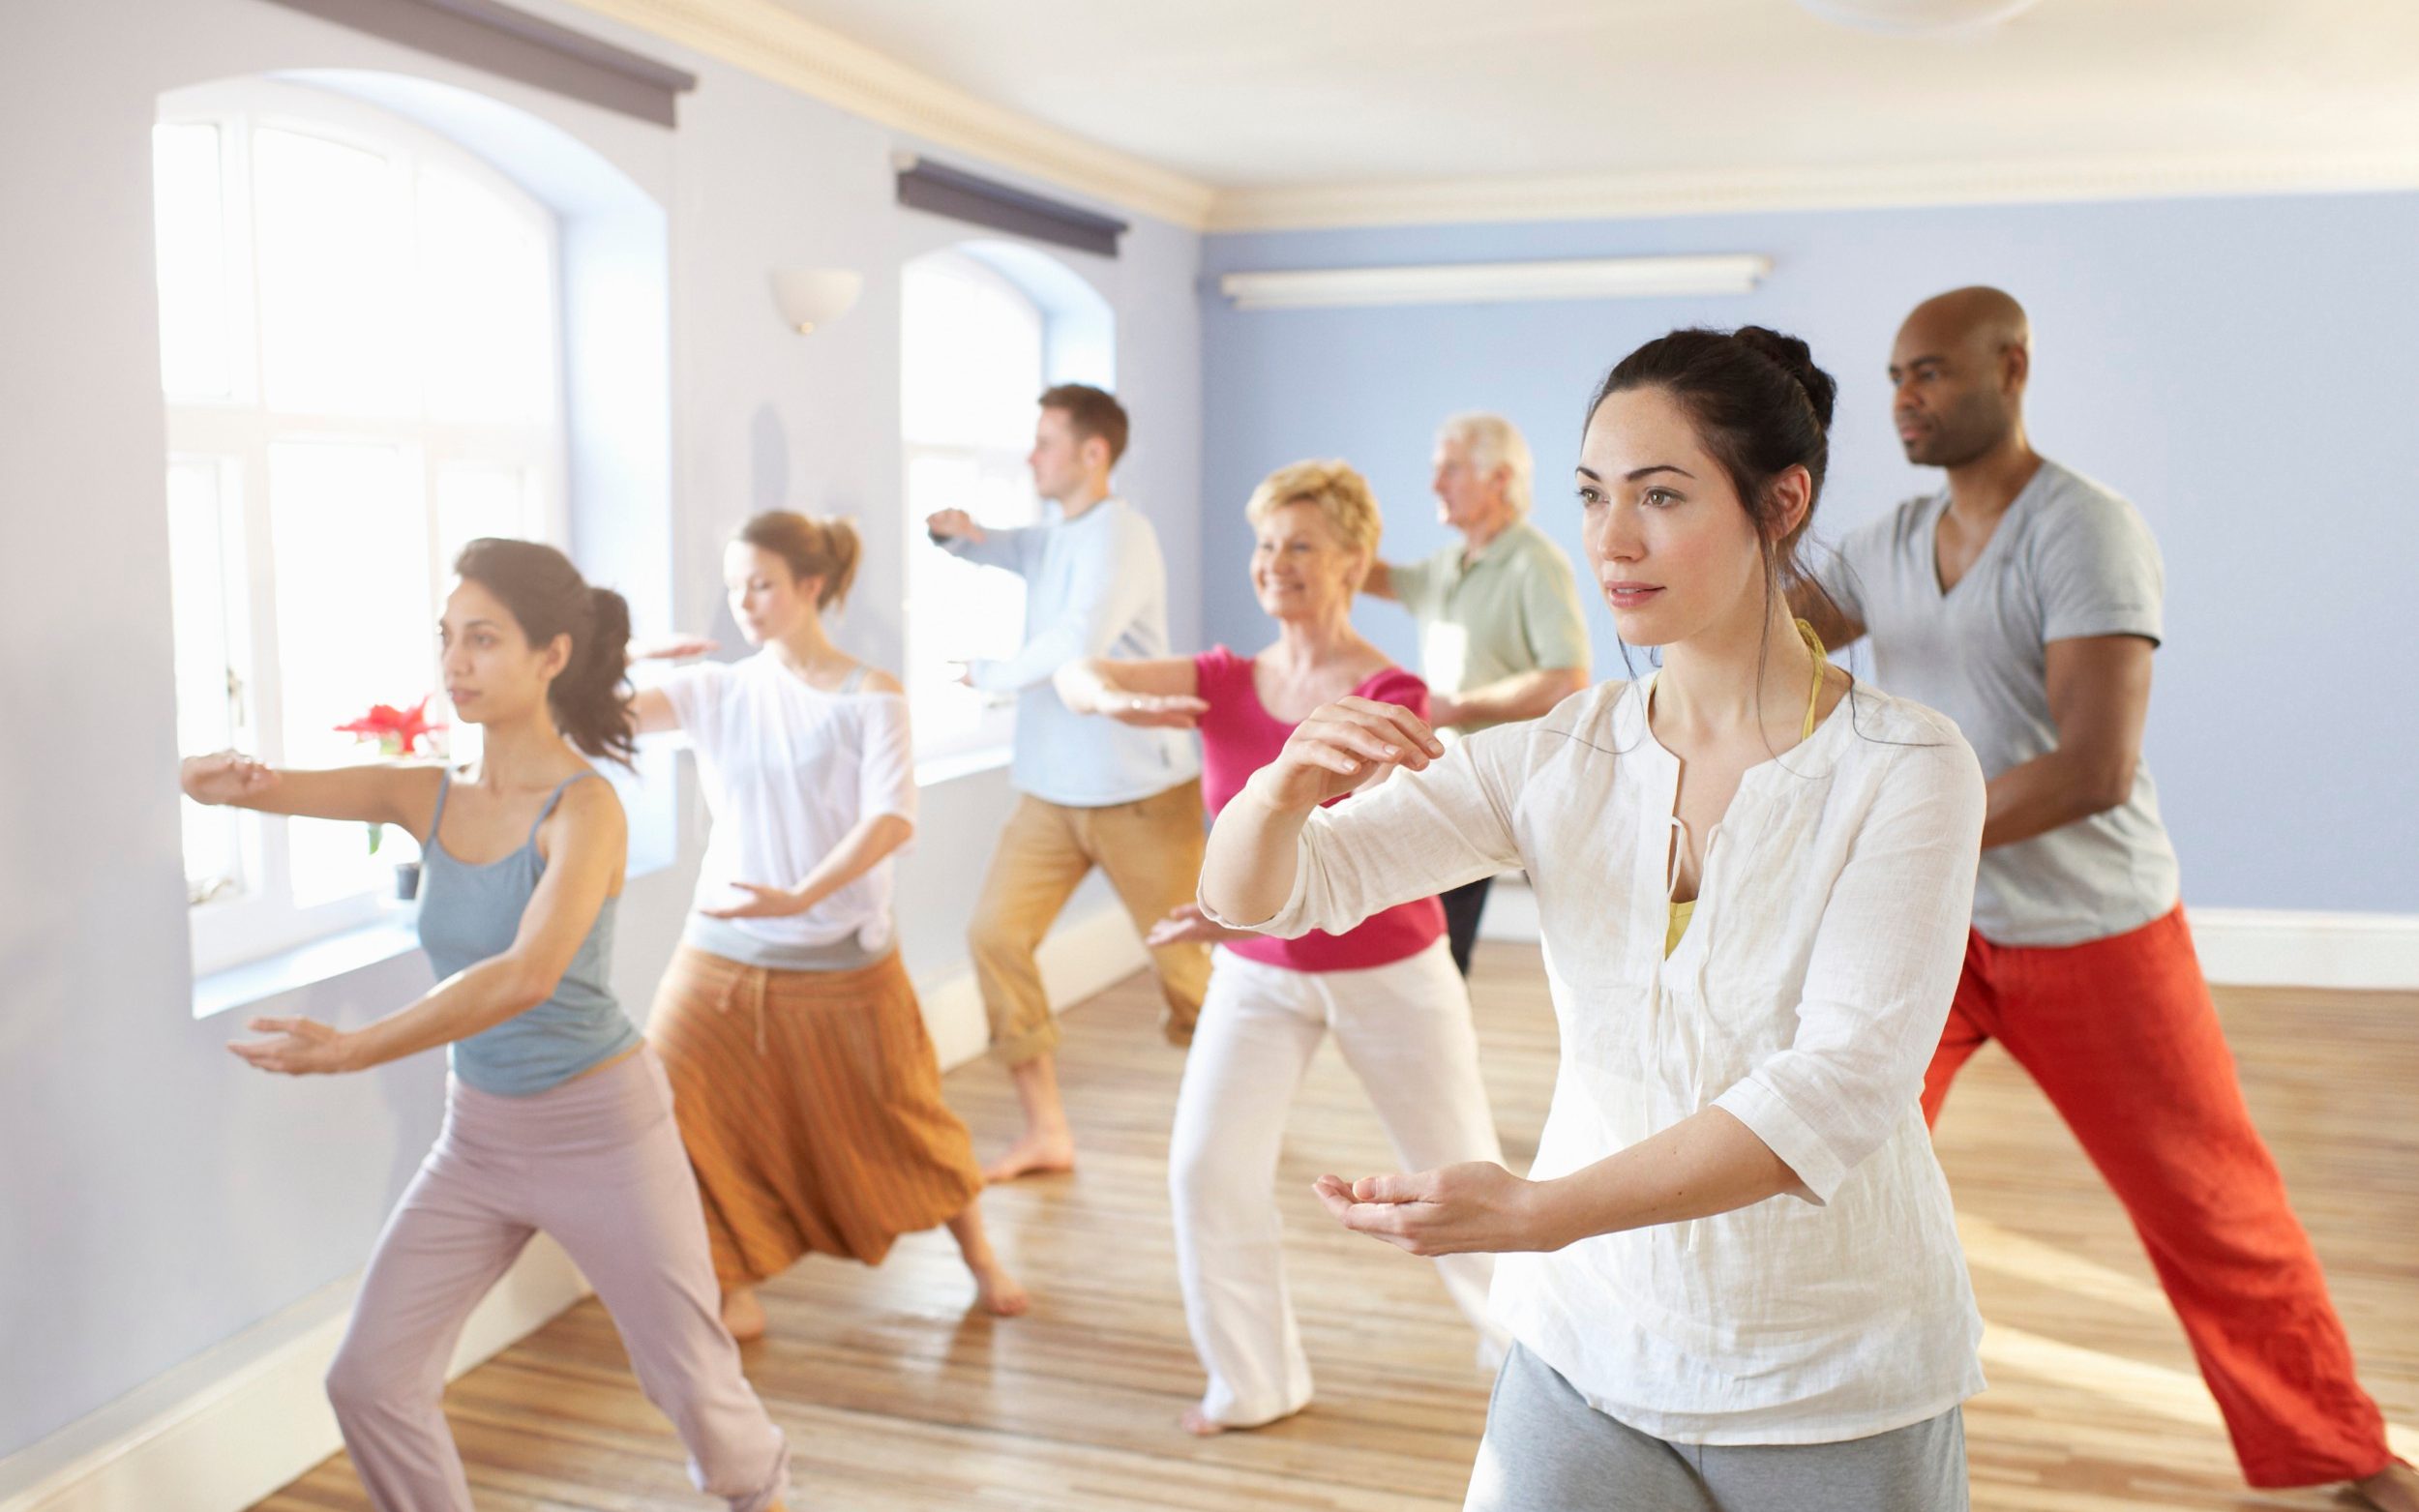 tai chi ‘more effective’ for reducing blood pressure than jogging or cycling